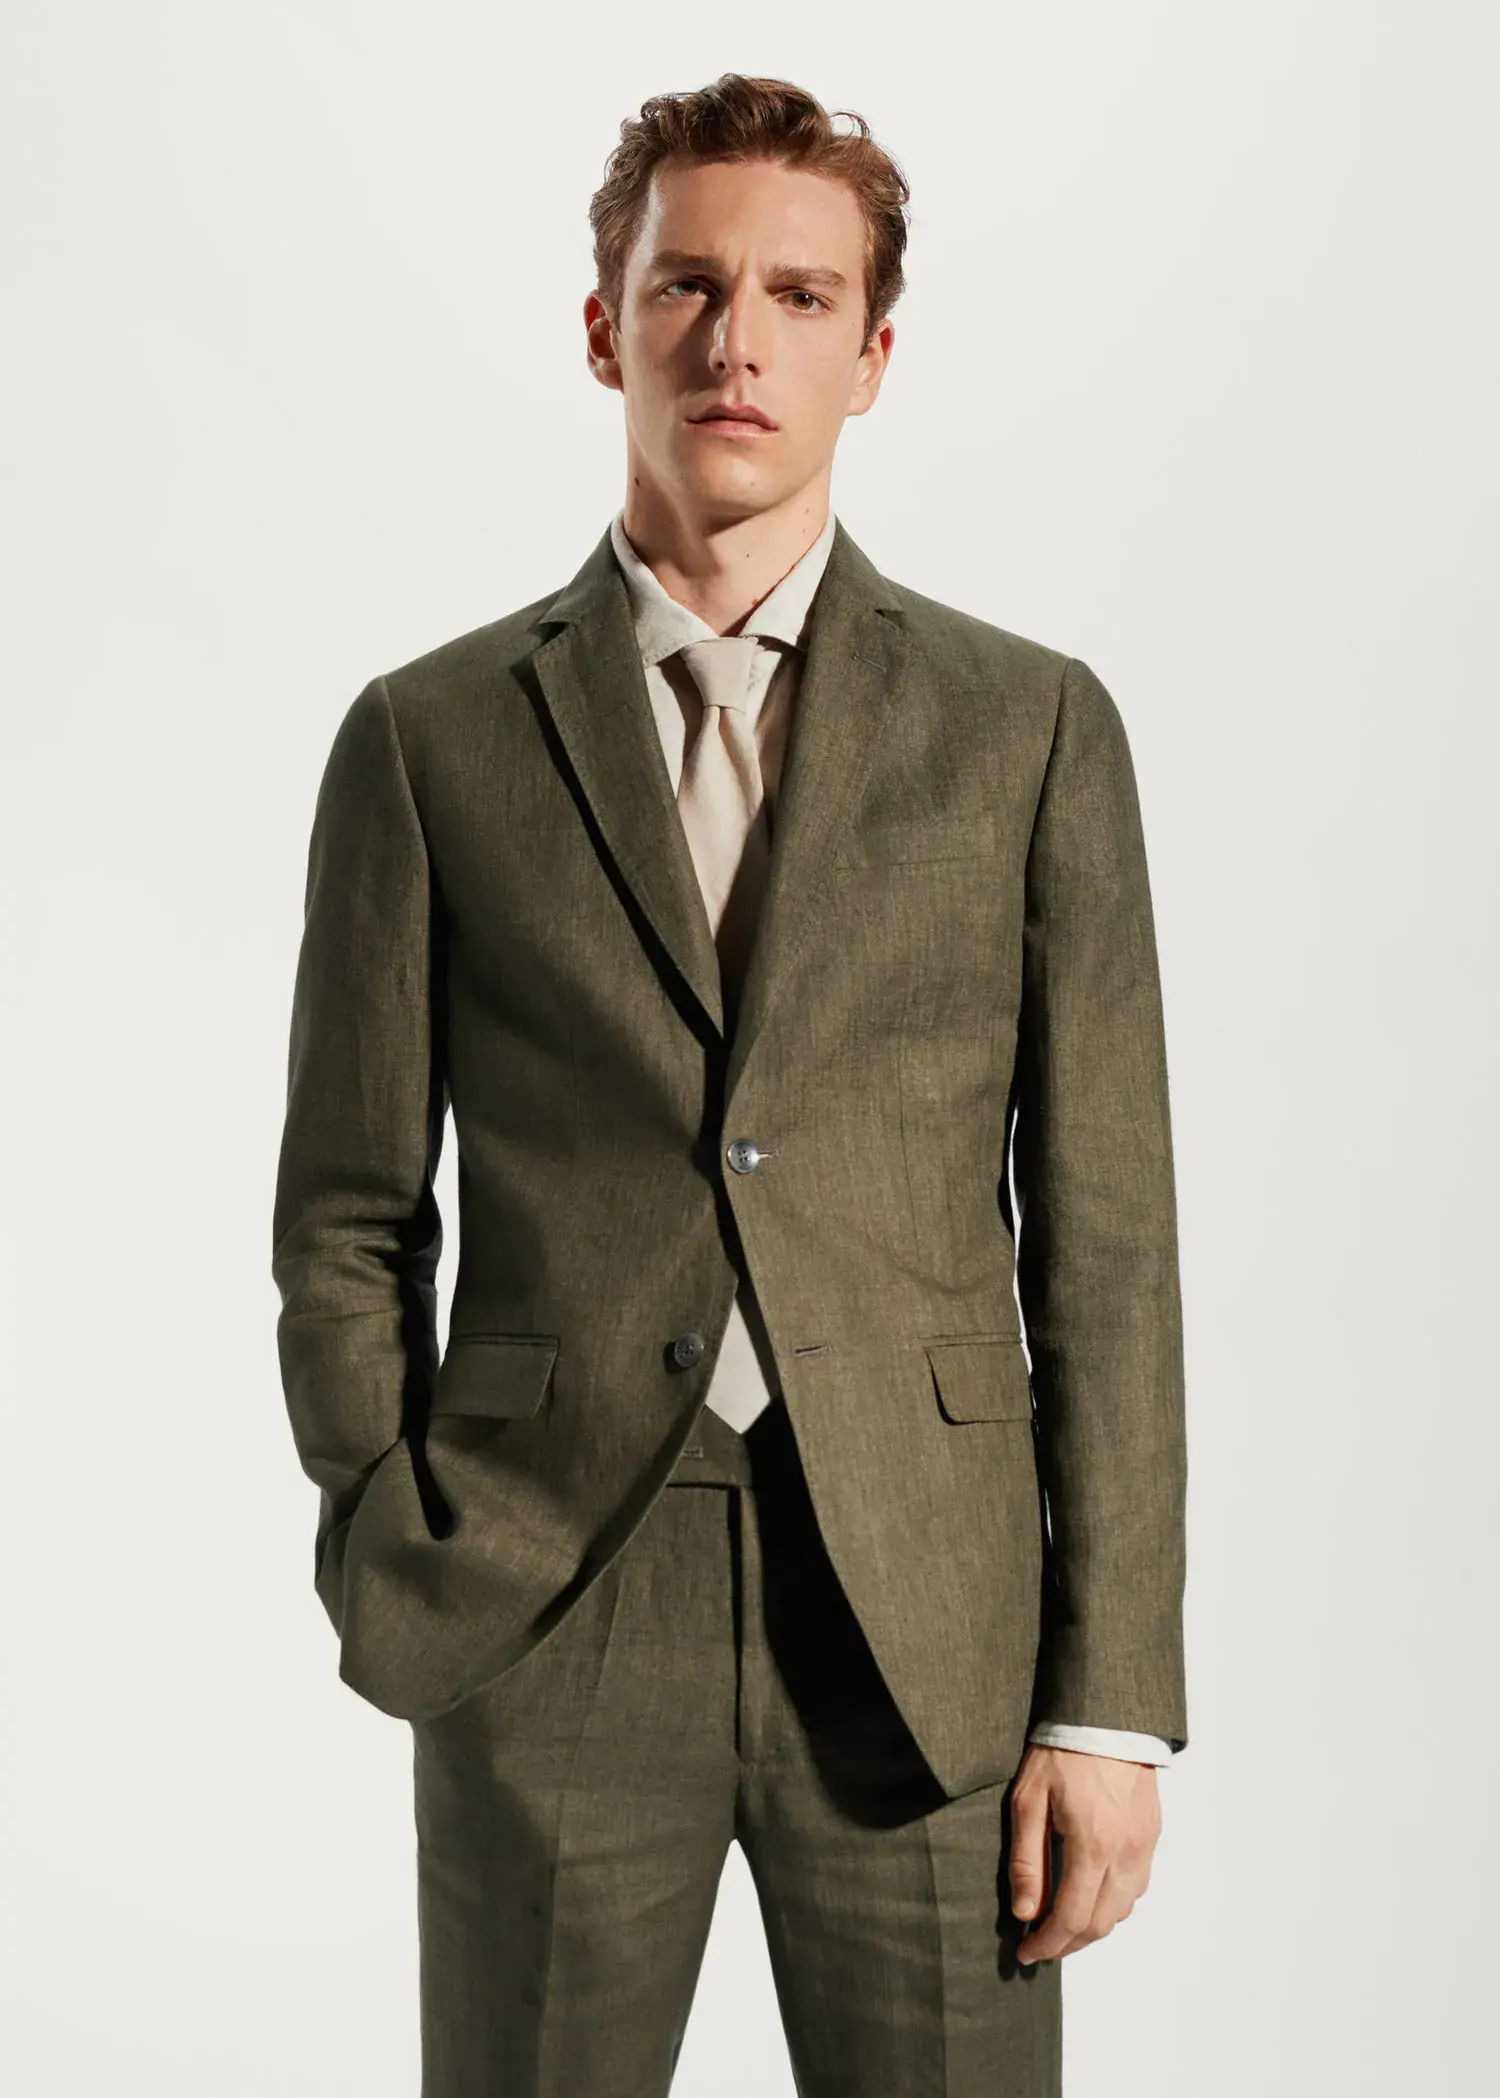 Mango 100% linen suit blazer. a man in a suit and tie standing in front of a wall. 